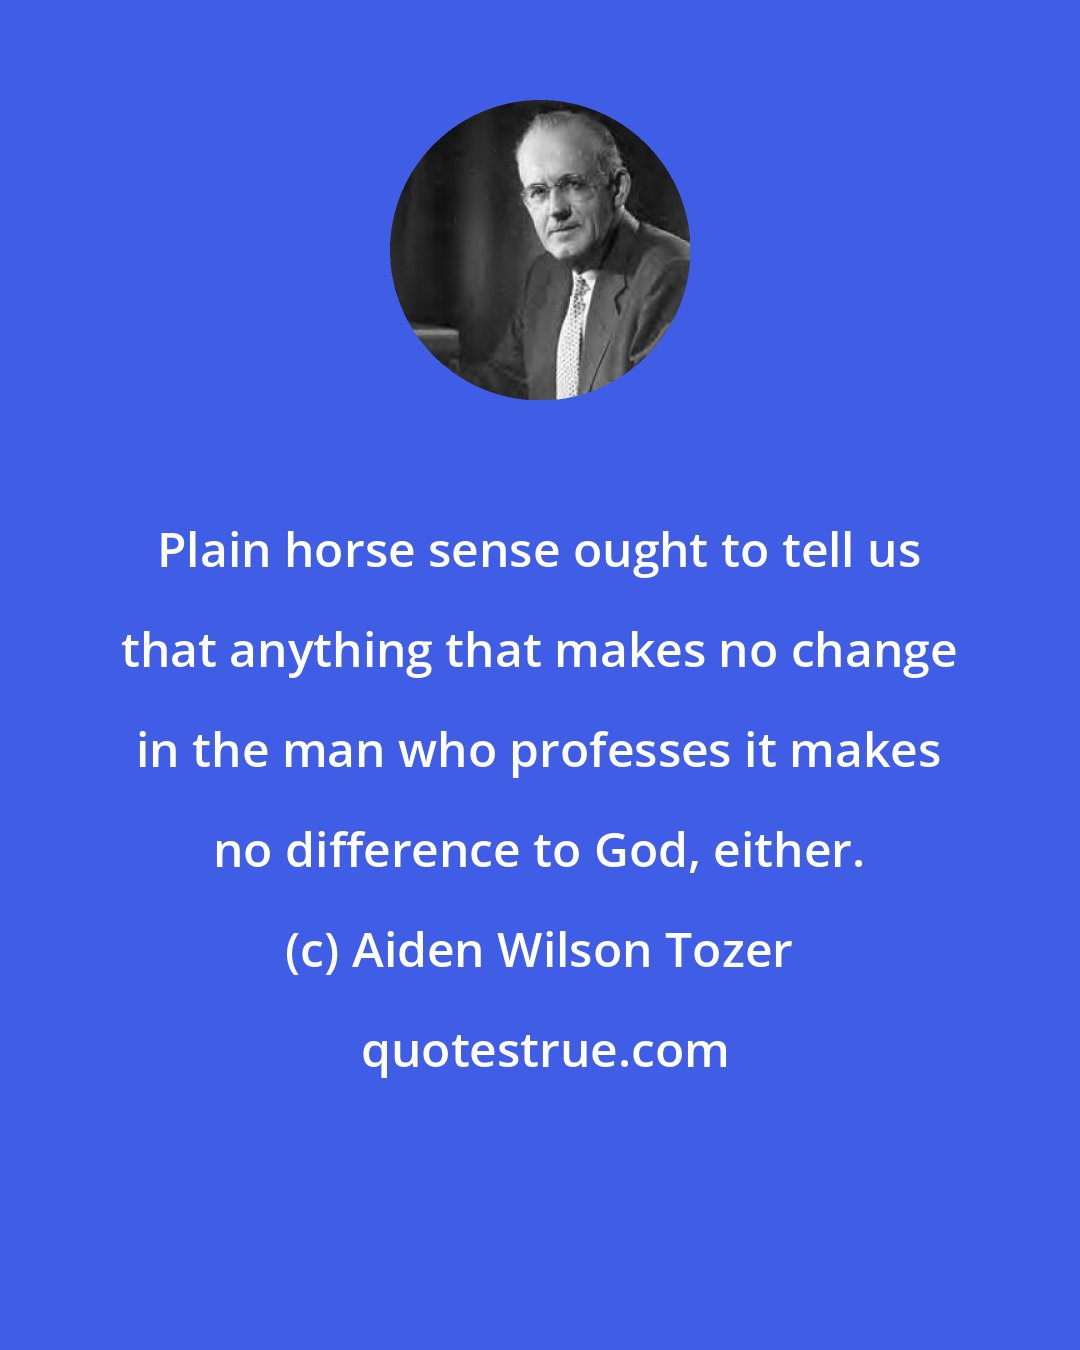 Aiden Wilson Tozer: Plain horse sense ought to tell us that anything that makes no change in the man who professes it makes no difference to God, either.